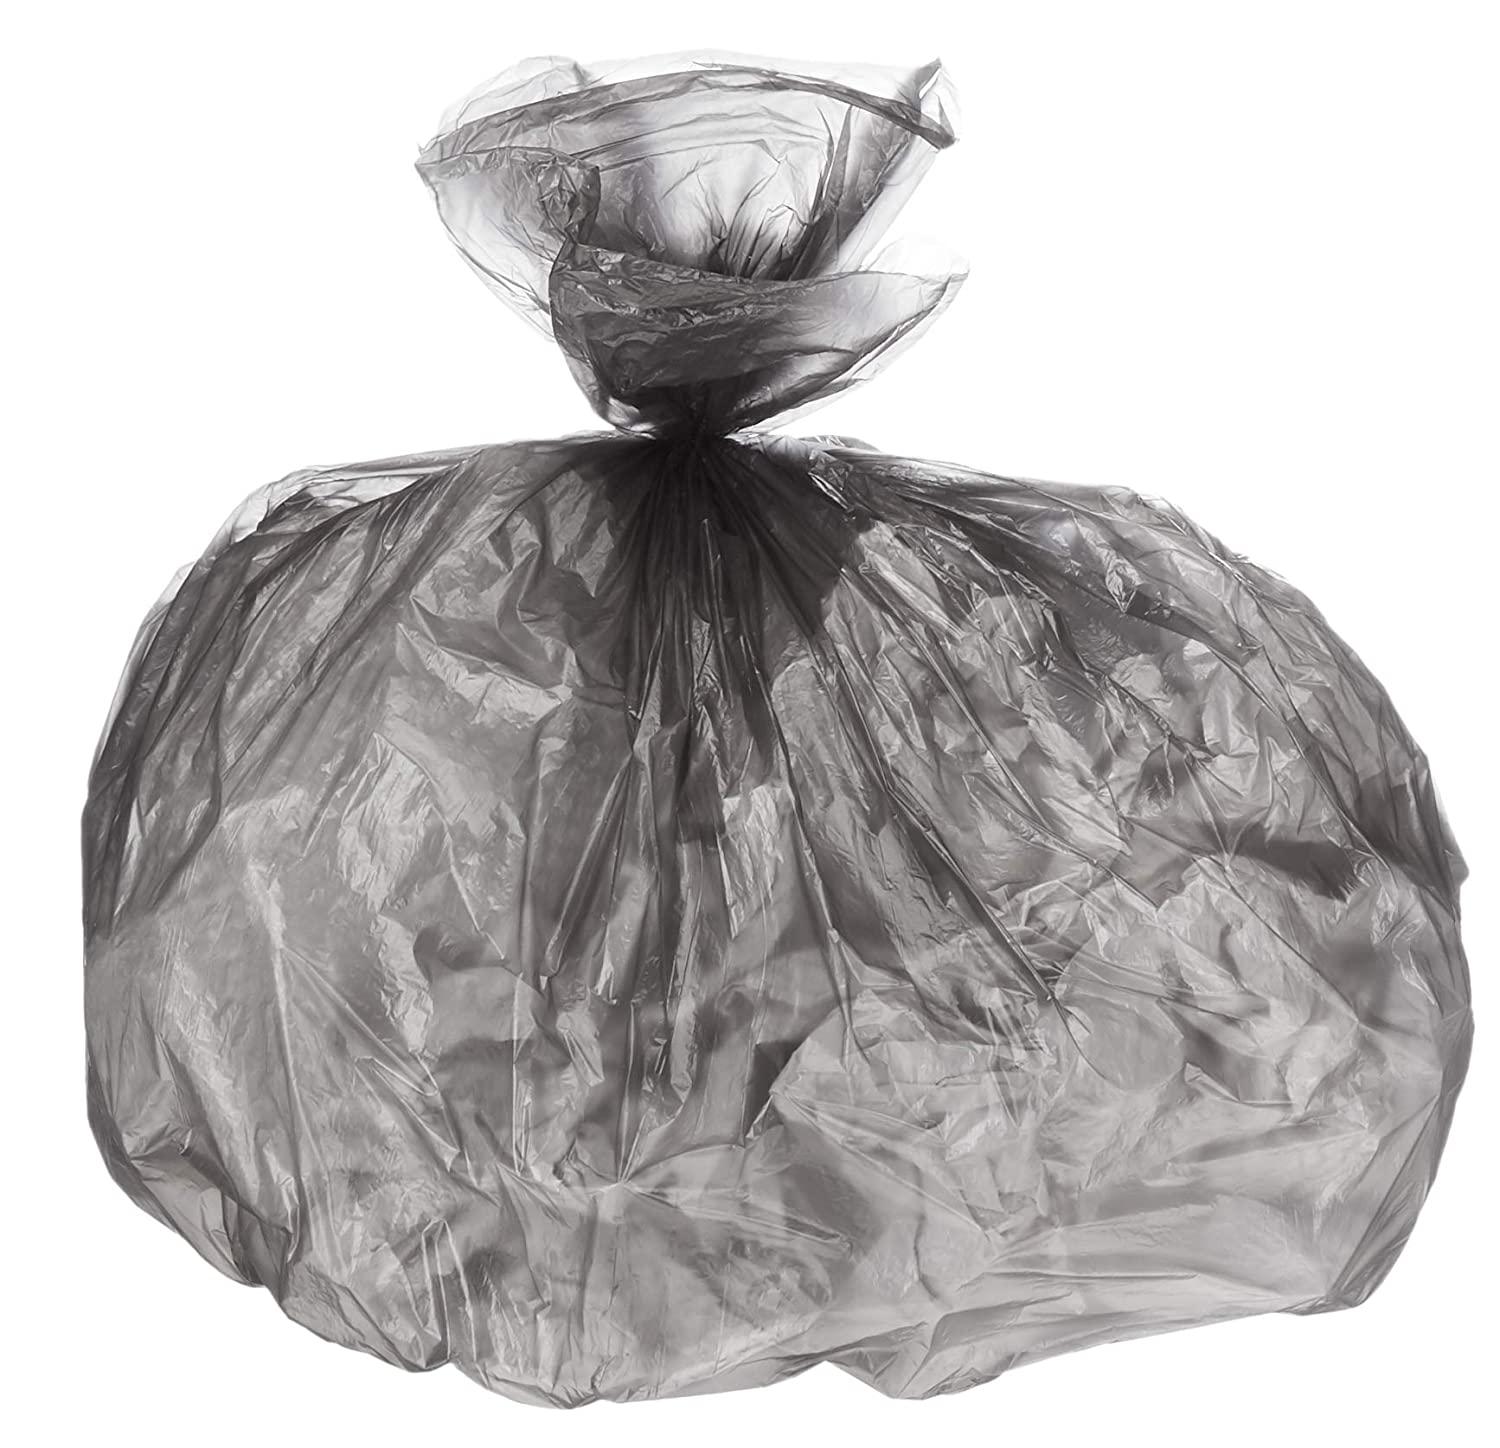 13-Gallon Amazon Commercial Trash Bags 100 Pack for $3.56